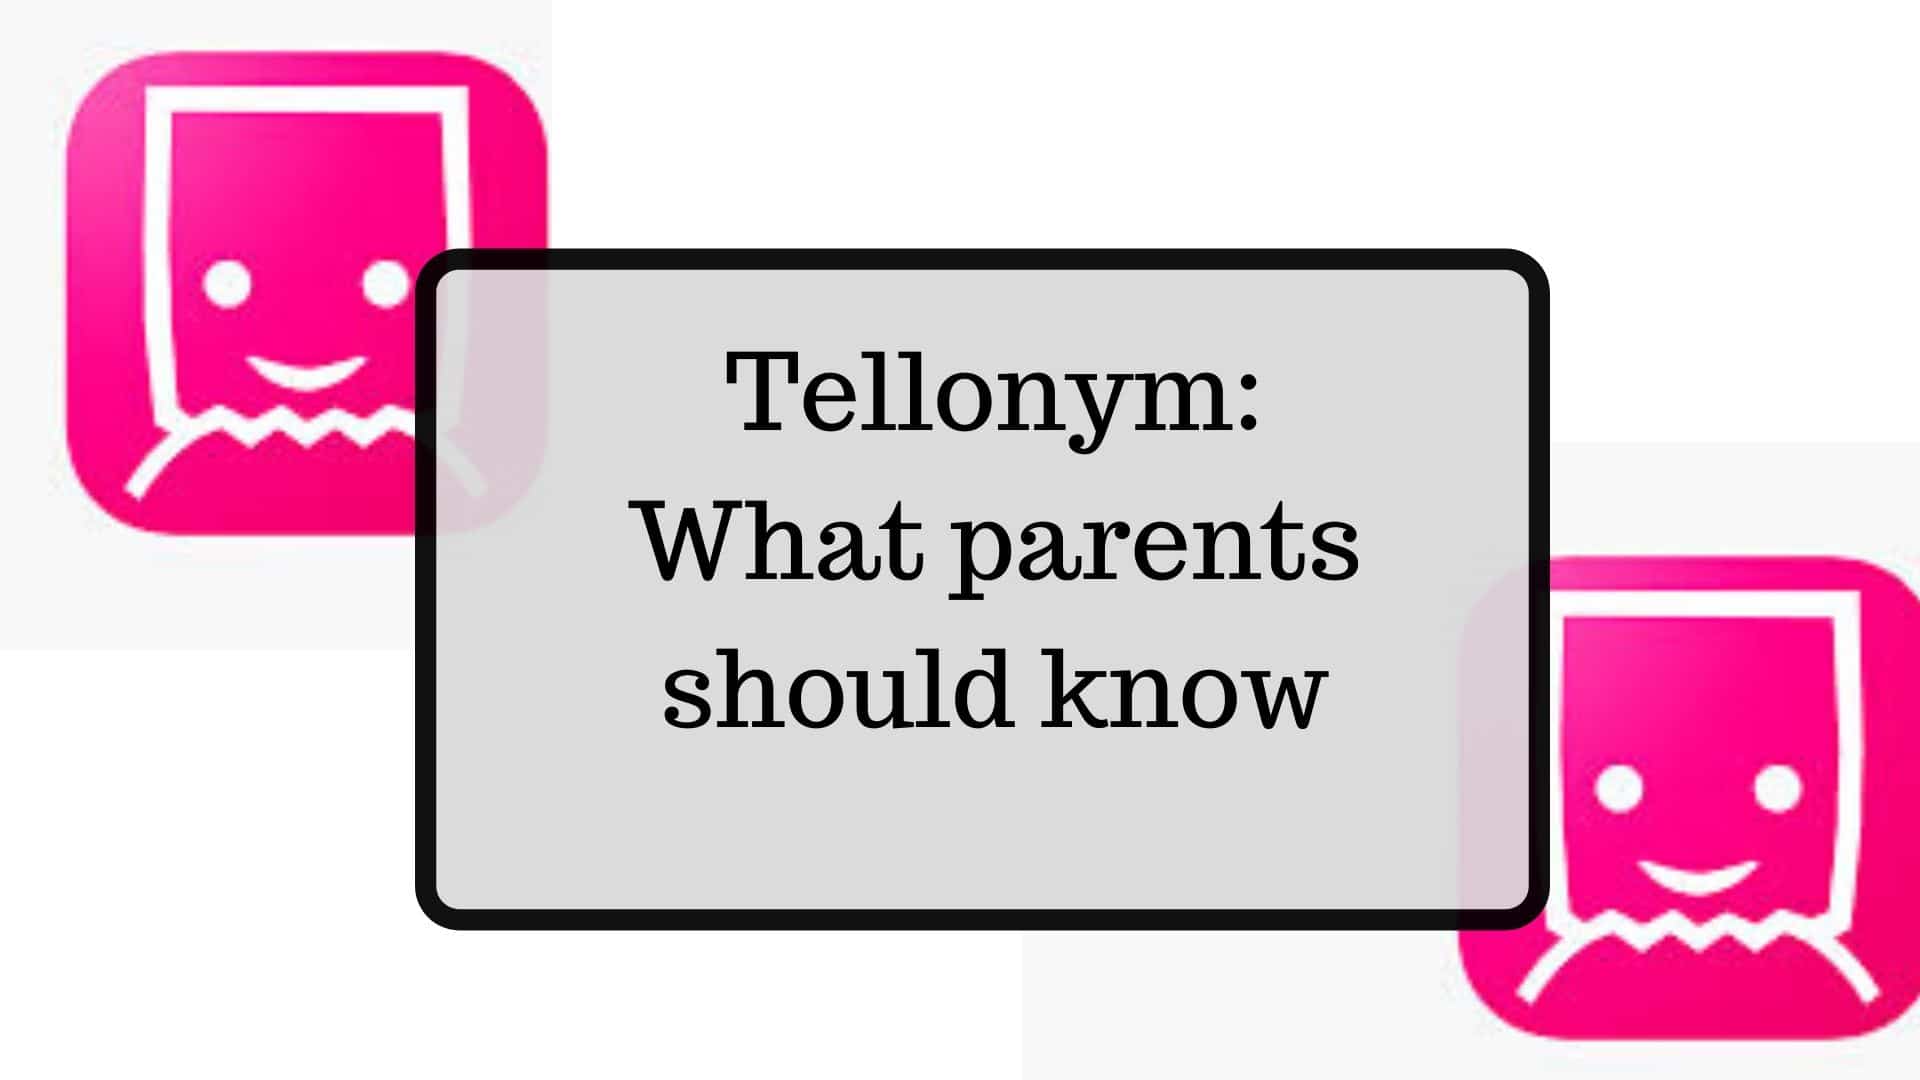 what parents should know about tellonym